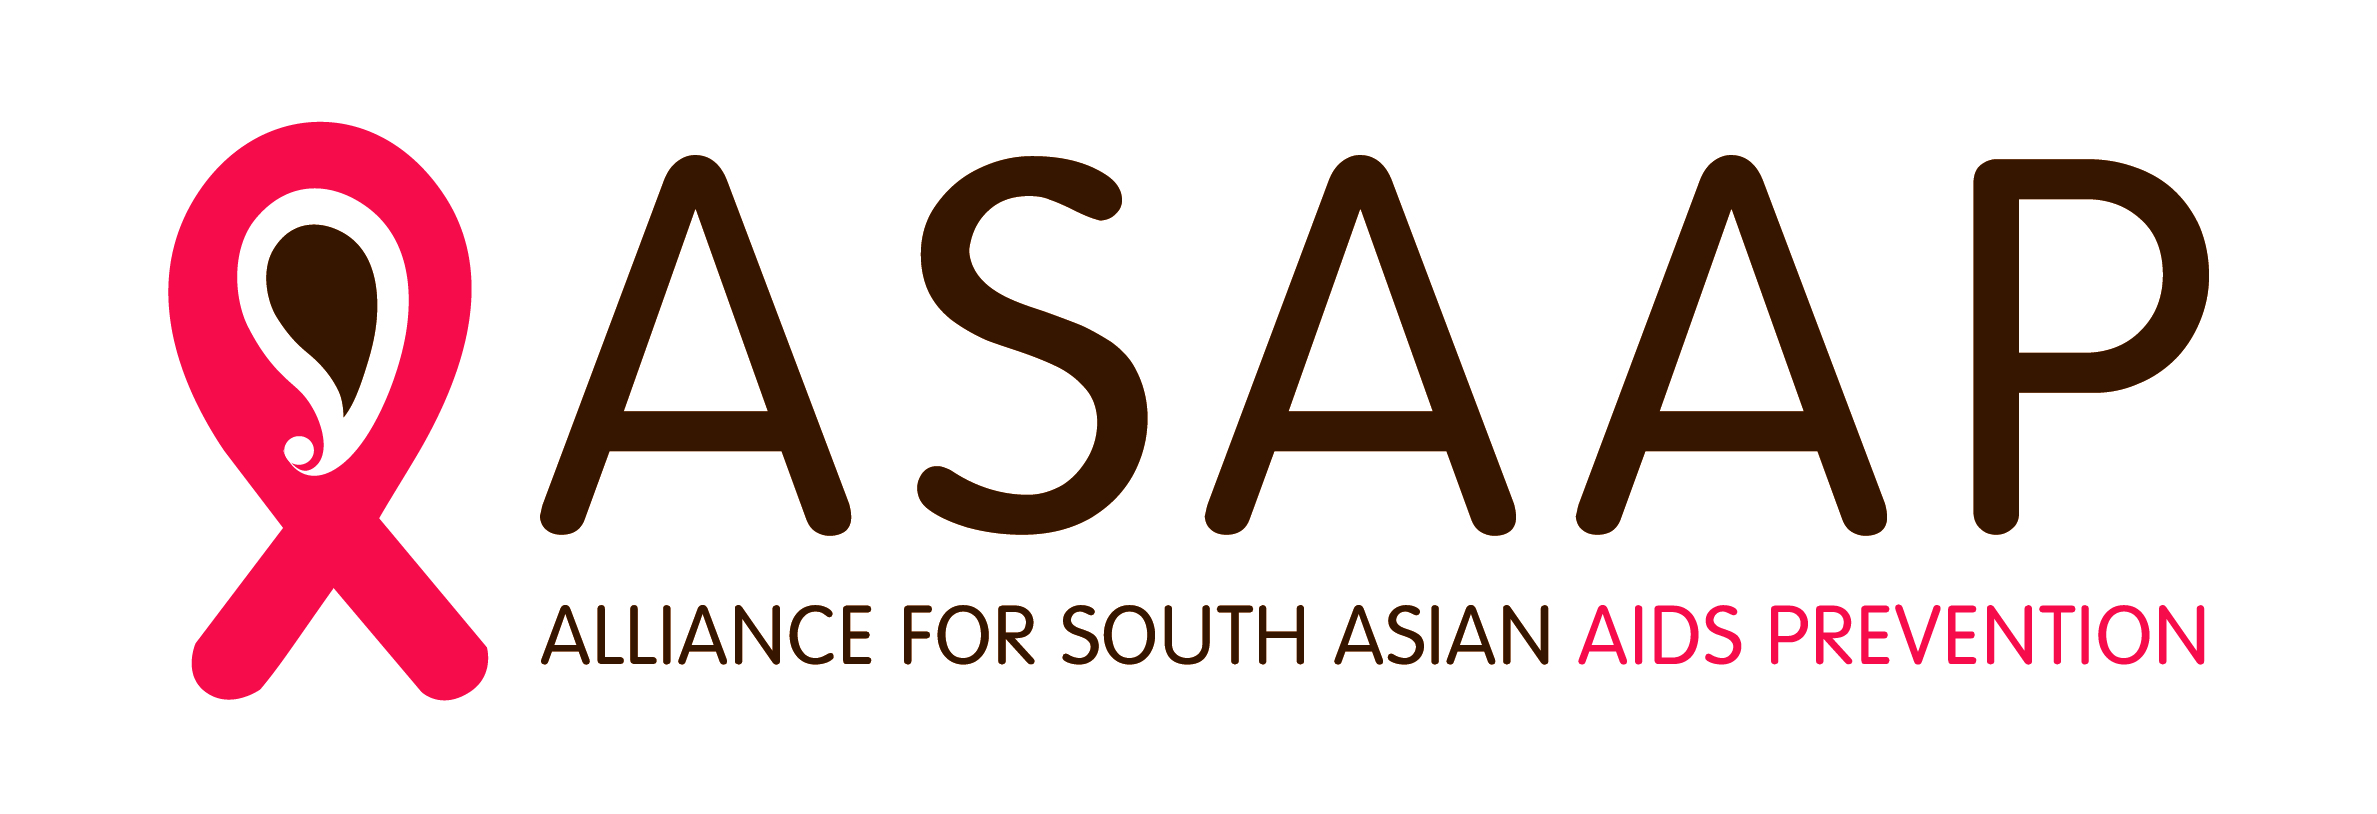 ALLIANCE FOR SOUTH ASIAN AIDS PREVENTION logo